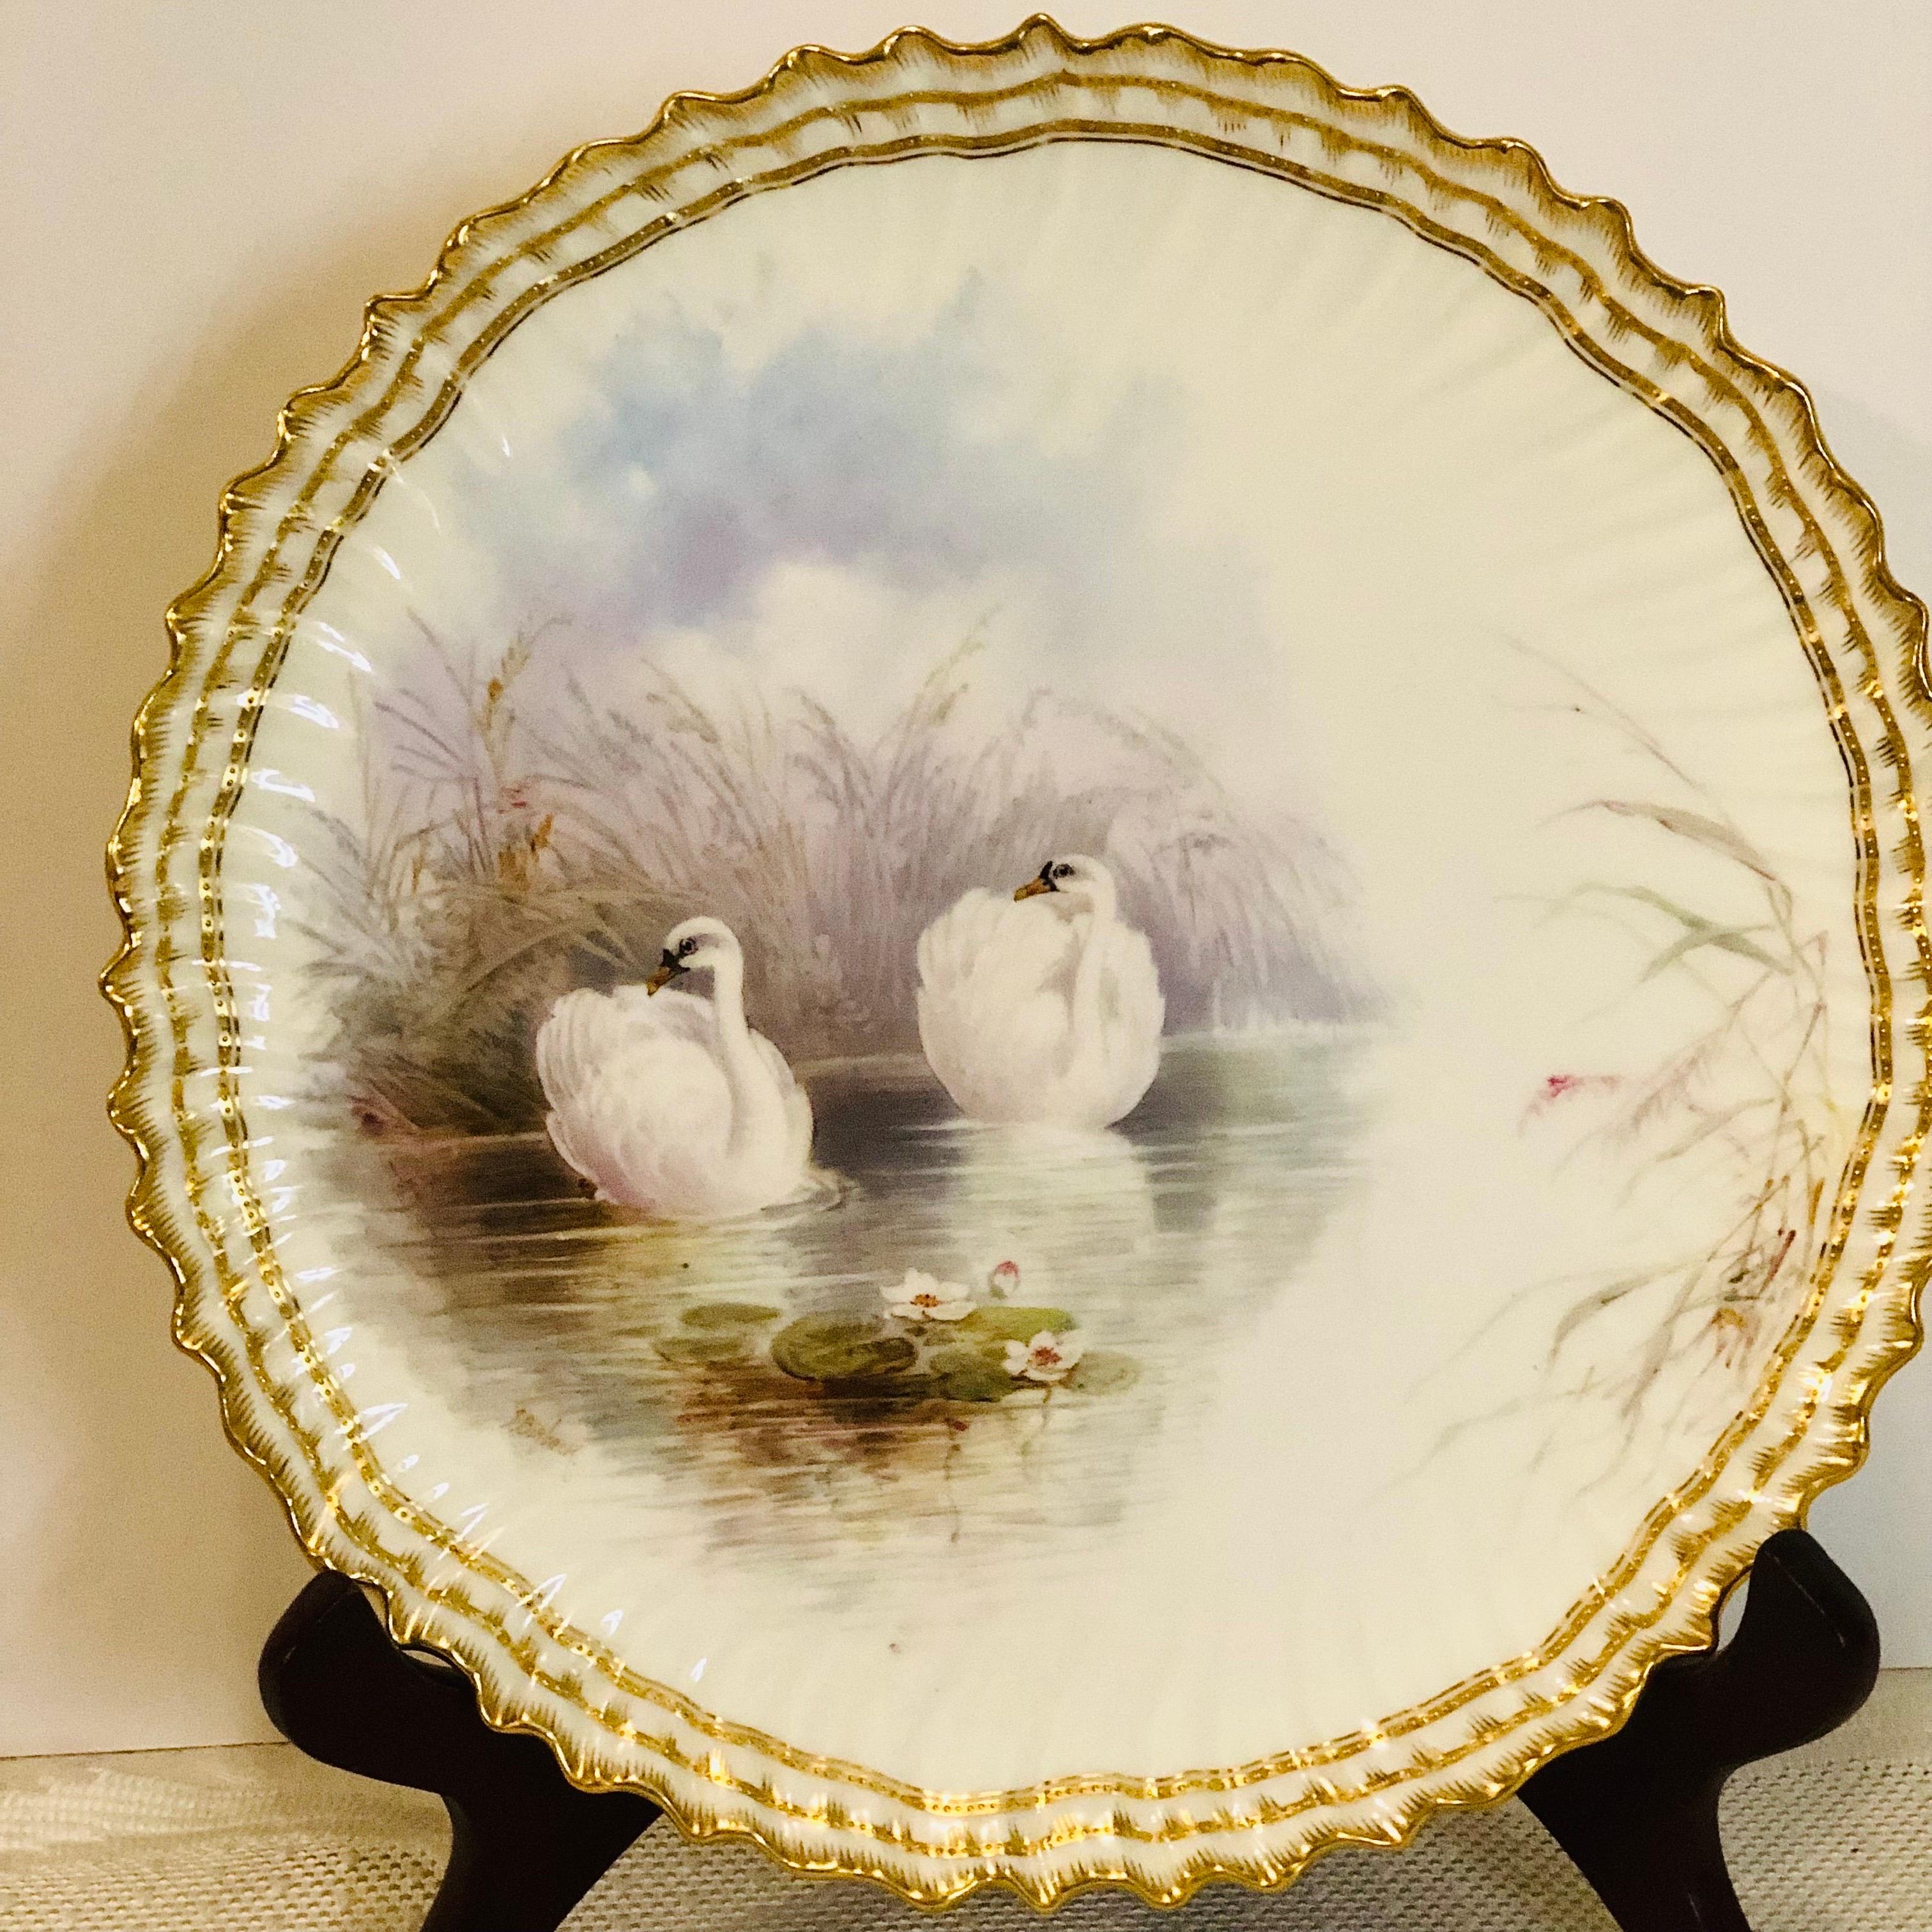 Set of 11 Cauldon Plates Each Painted Exquisitely With a Different Bird  2